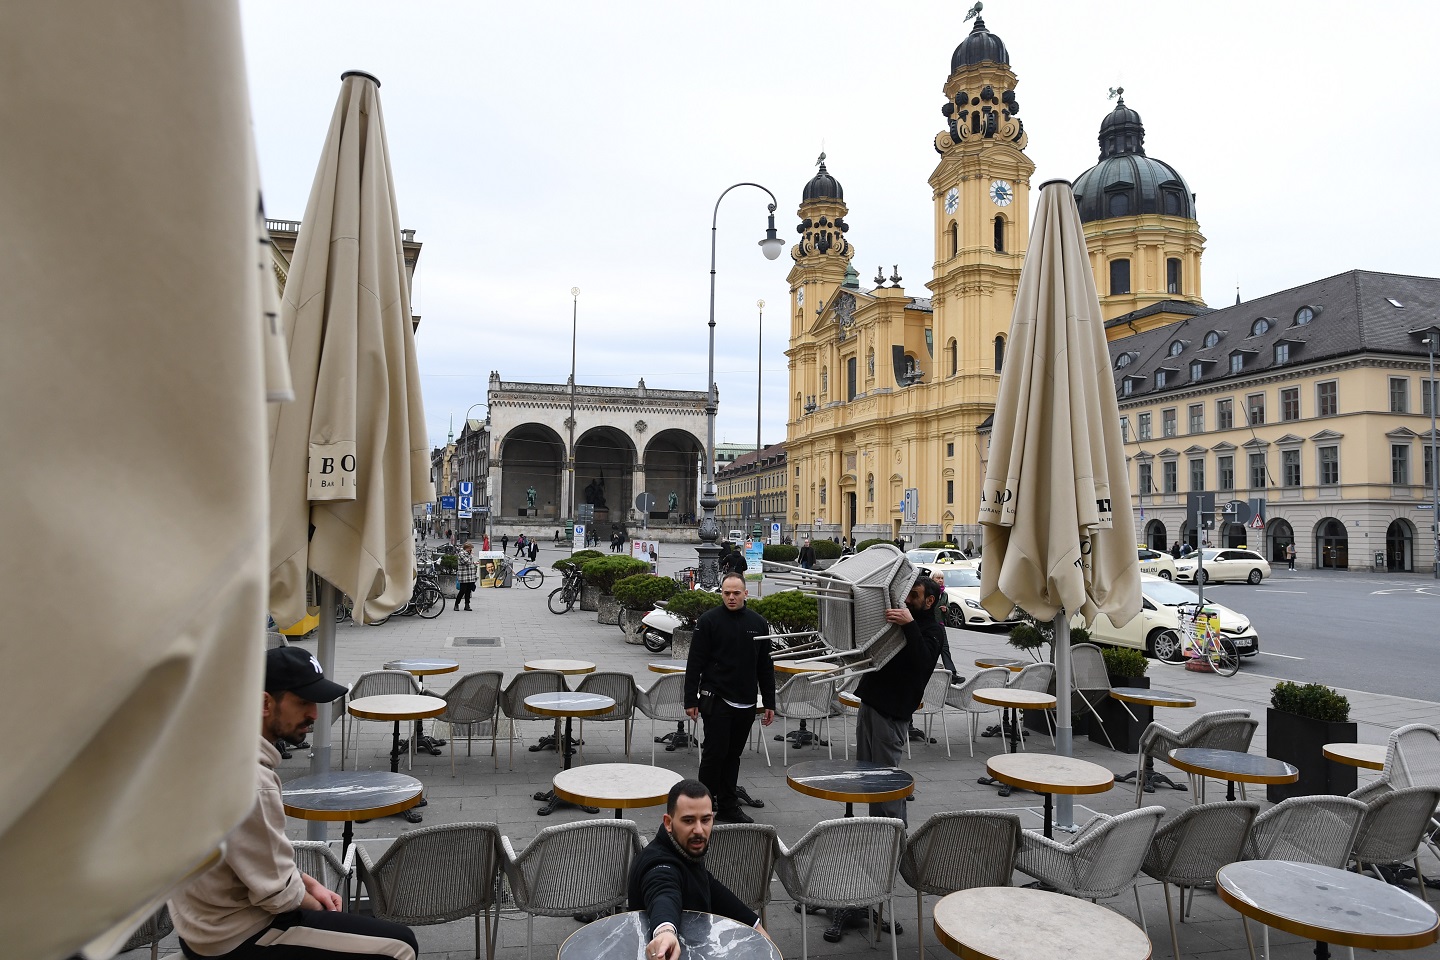 A photograph of employees at cafe Odeonsplatz removing chairs and tables from the terrace due to earlier closing hours on March 17, 2020 in Munich, Germany.